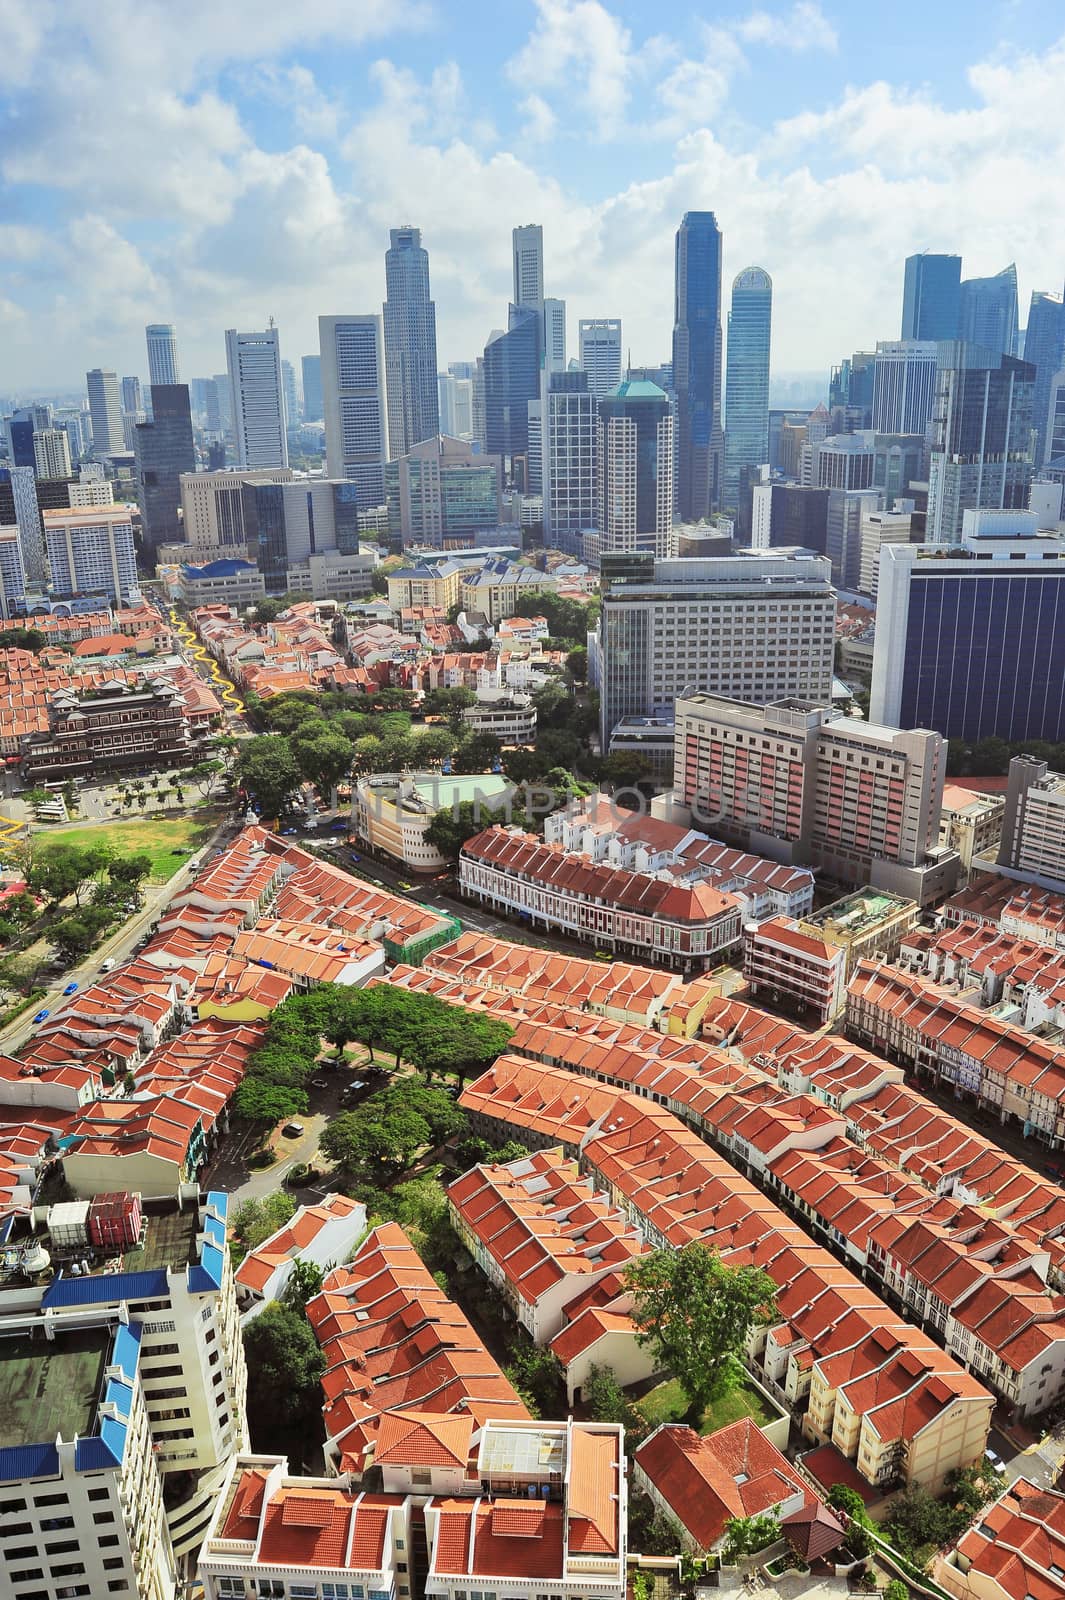 Aerial view of Chinatown and business district of Singapore